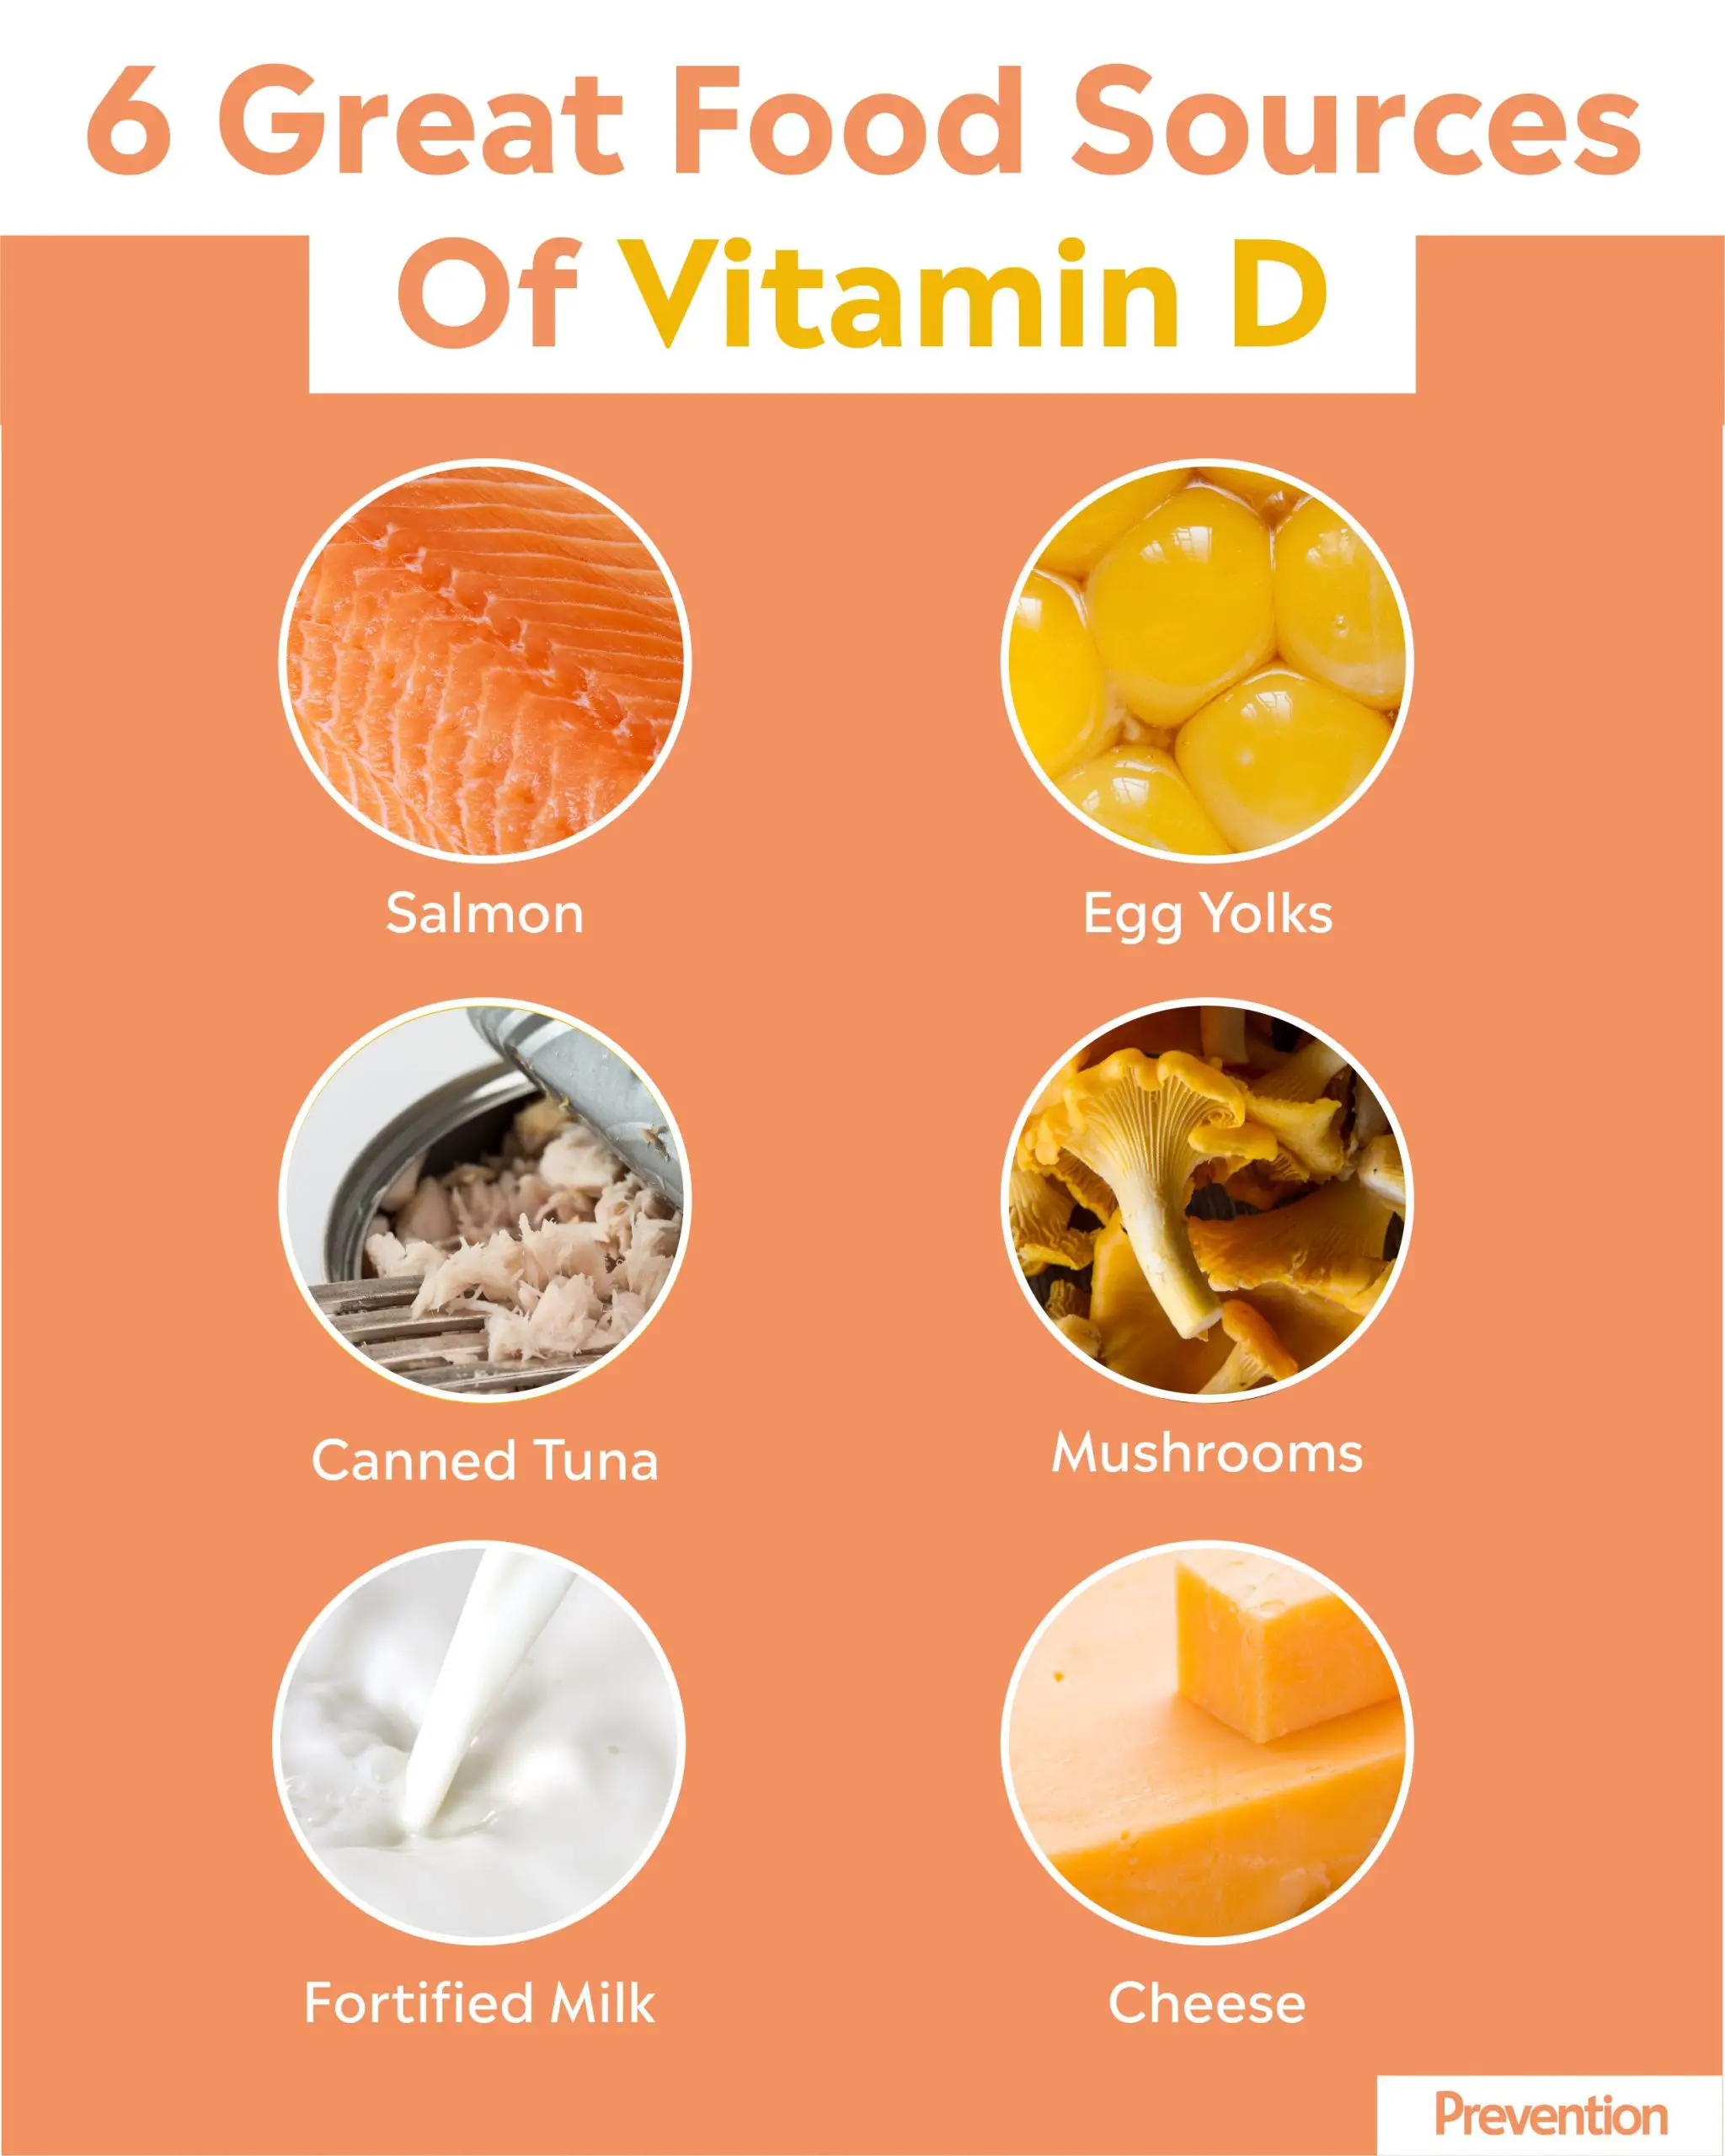 How Do You Get More Vitamin D In Your Diet